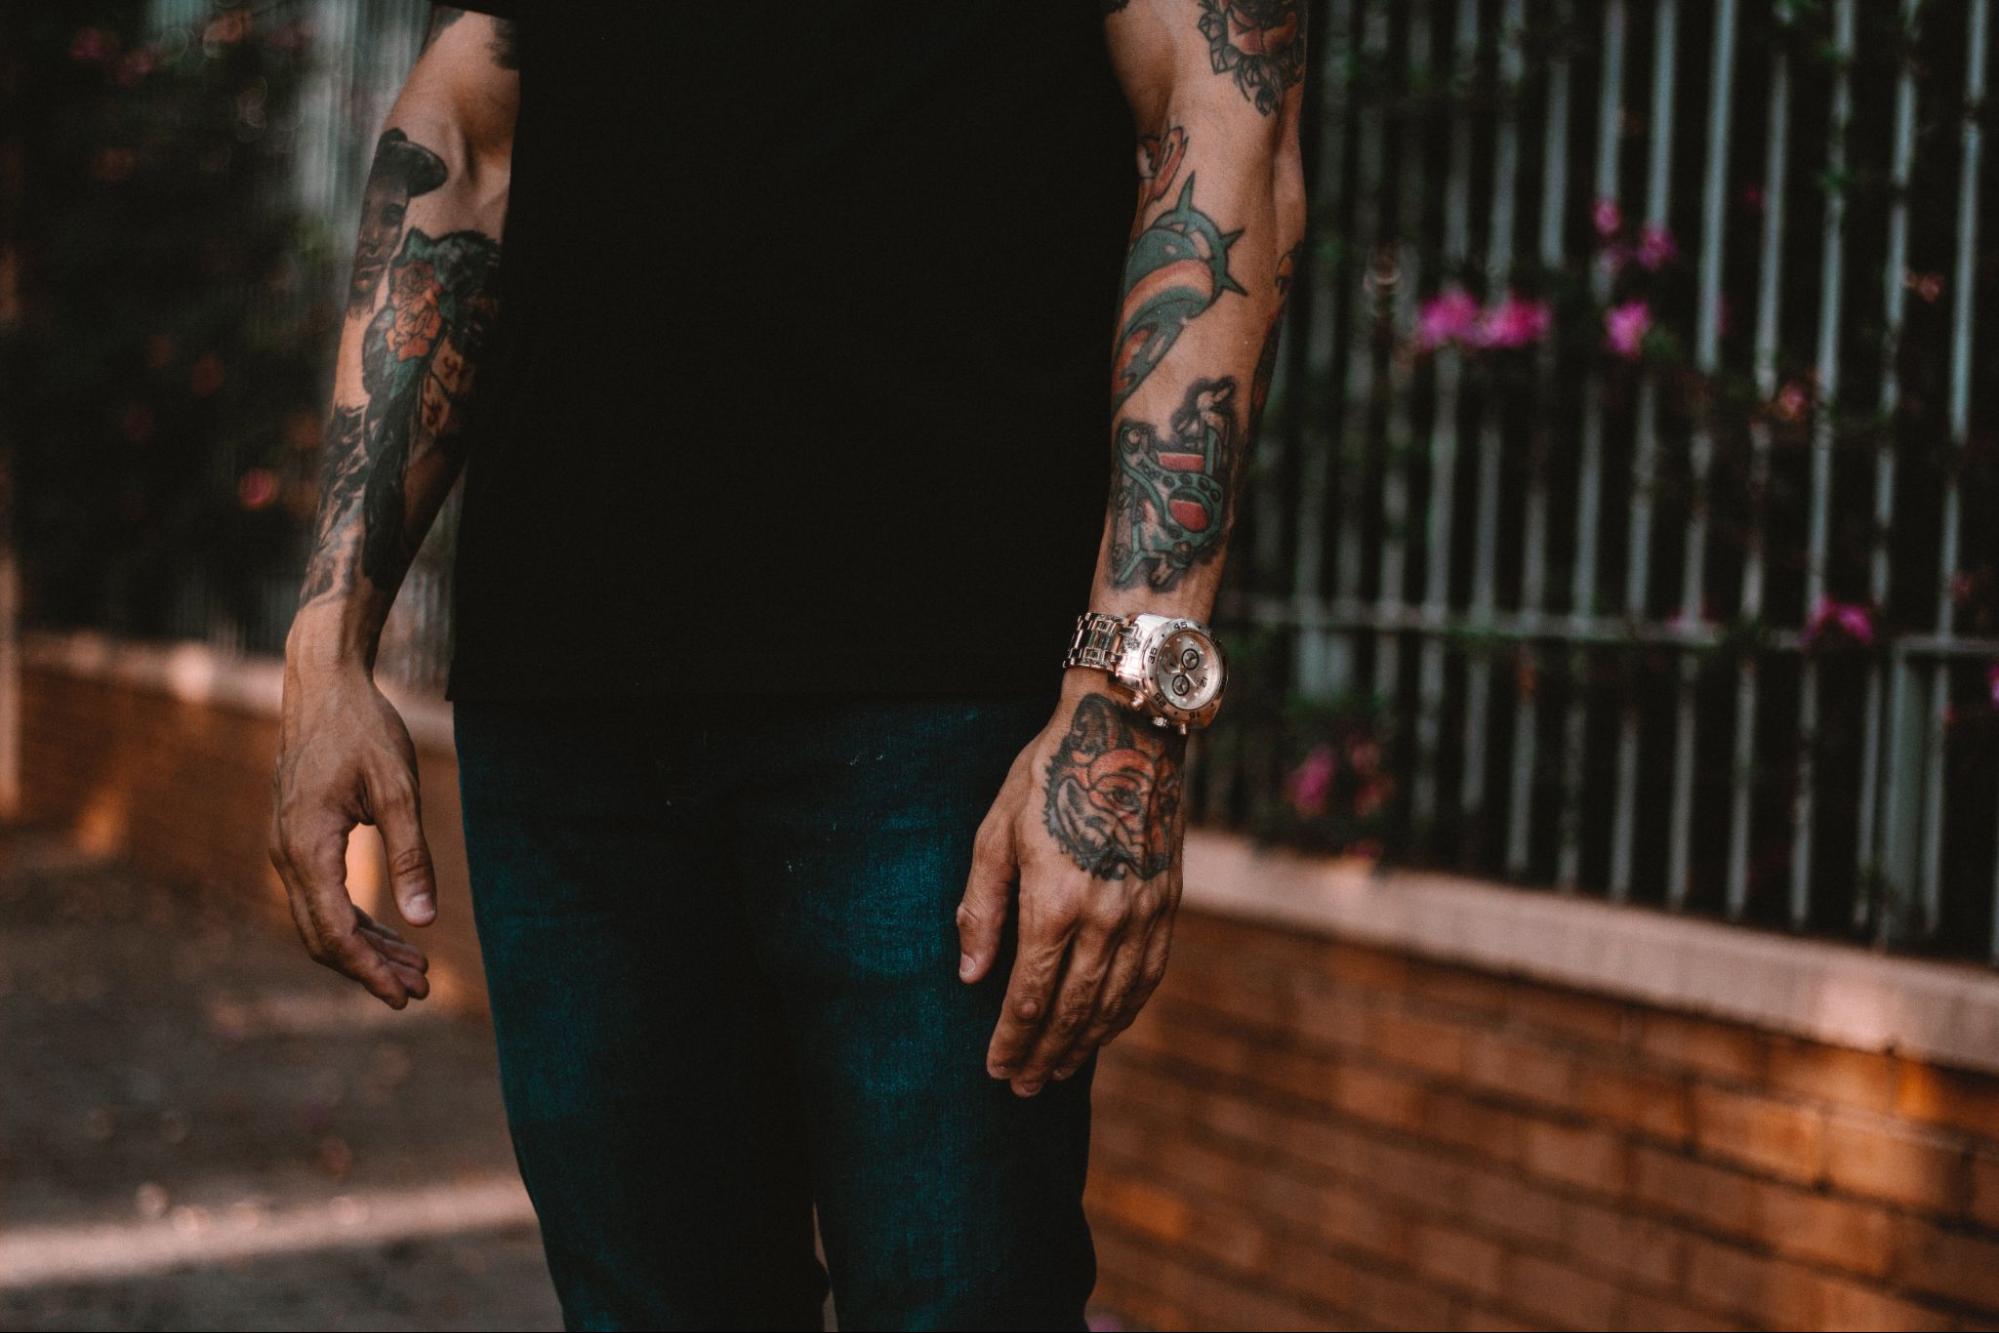 A man with tattoed forearms and a watch